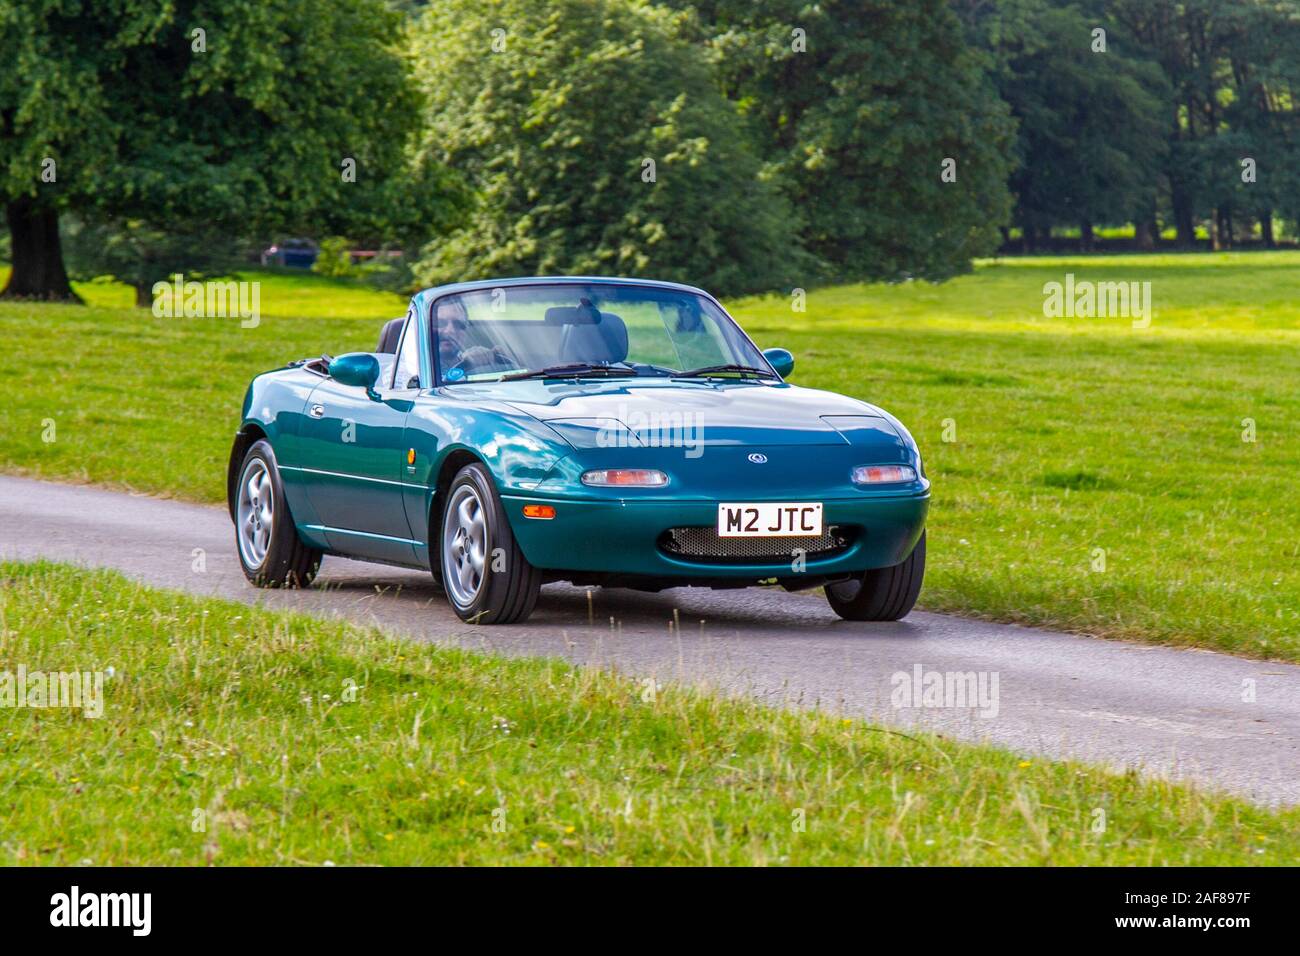 1998 90s green Mazda Mx-5 Berkeley; Classic cars, historics, cherished, old timers, collectable restored vintage veteran, heritage vehicles of yesteryear arriving for the Mark Woodward historical motoring event at Leighton Hall, Carnforth, UK Stock Photo